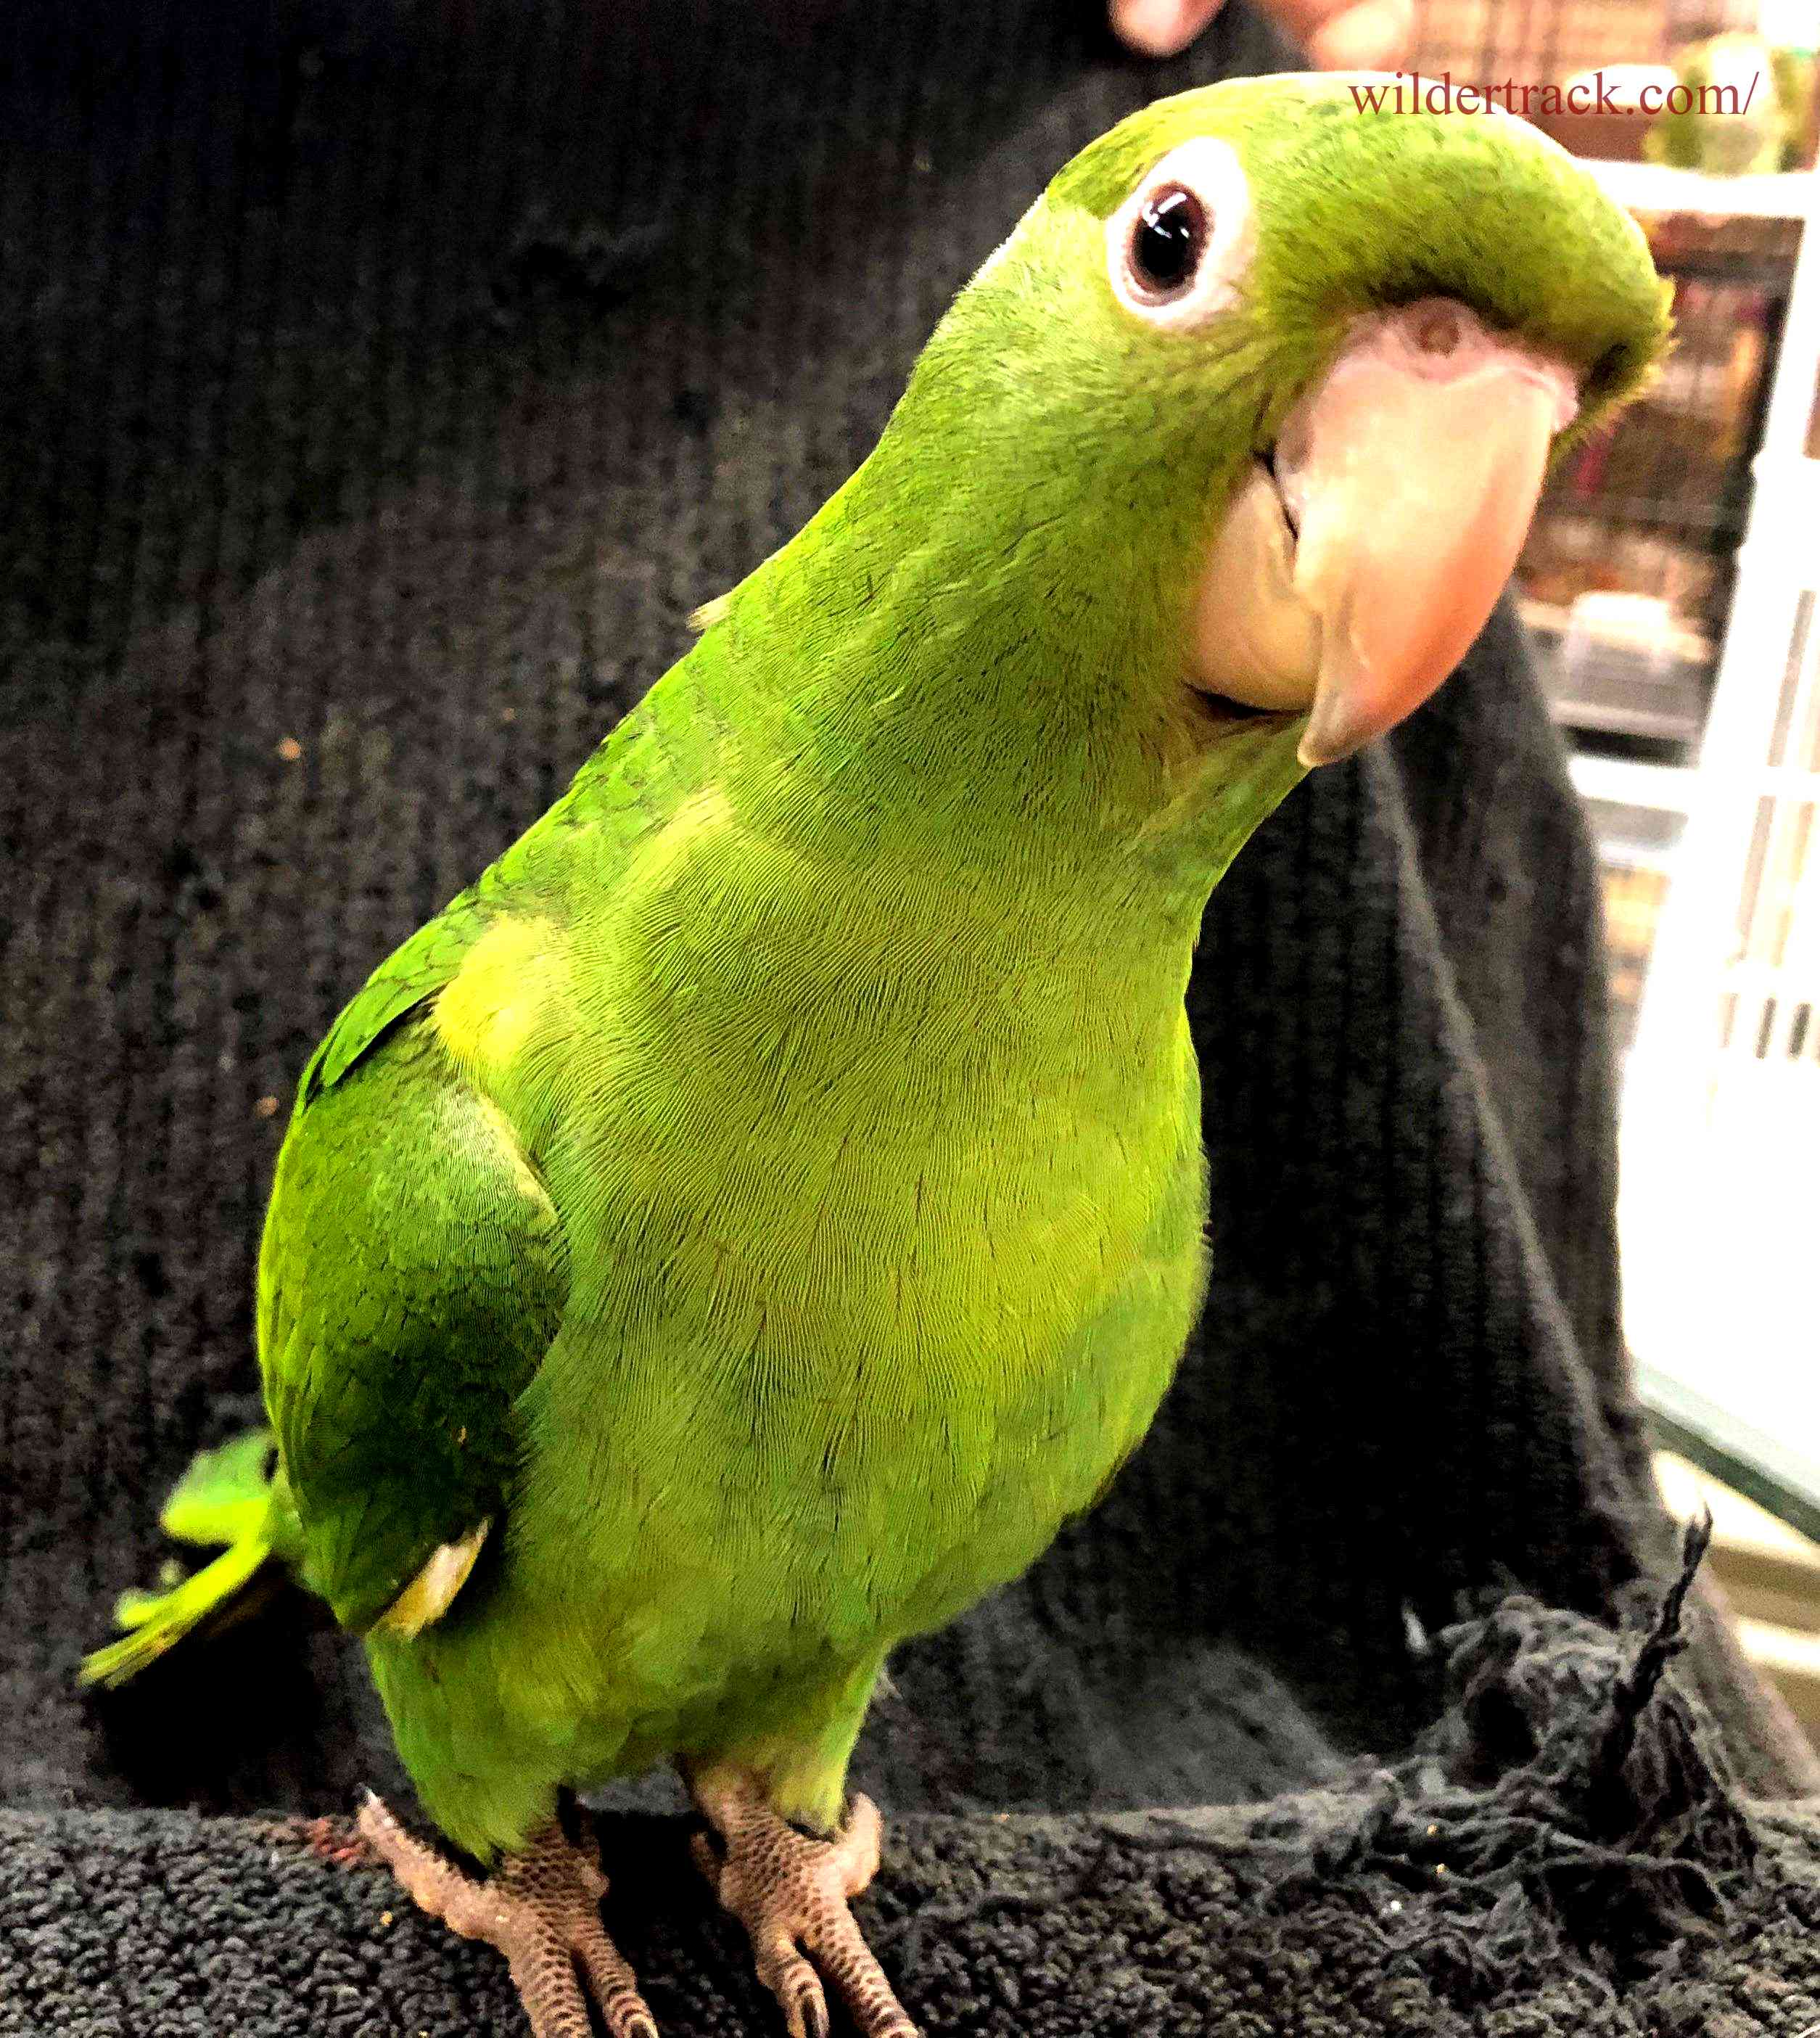  Caring for Your Cherry Head Conure 